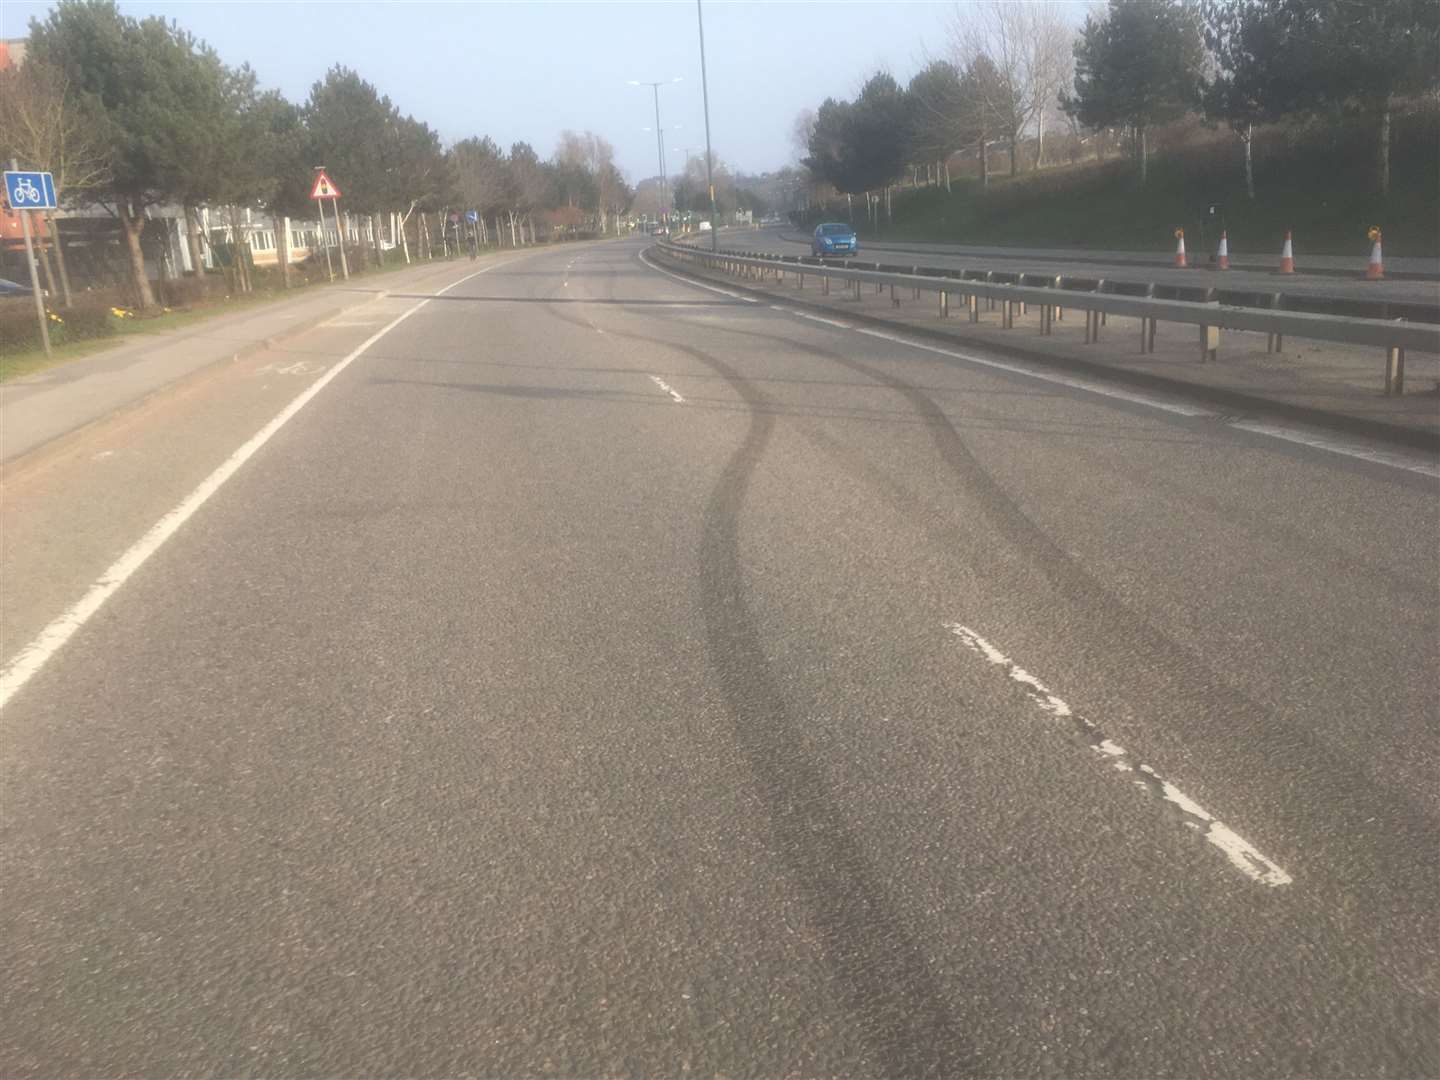 Tyre marks have been left in the road in Crossways Boulevard after previous rallies